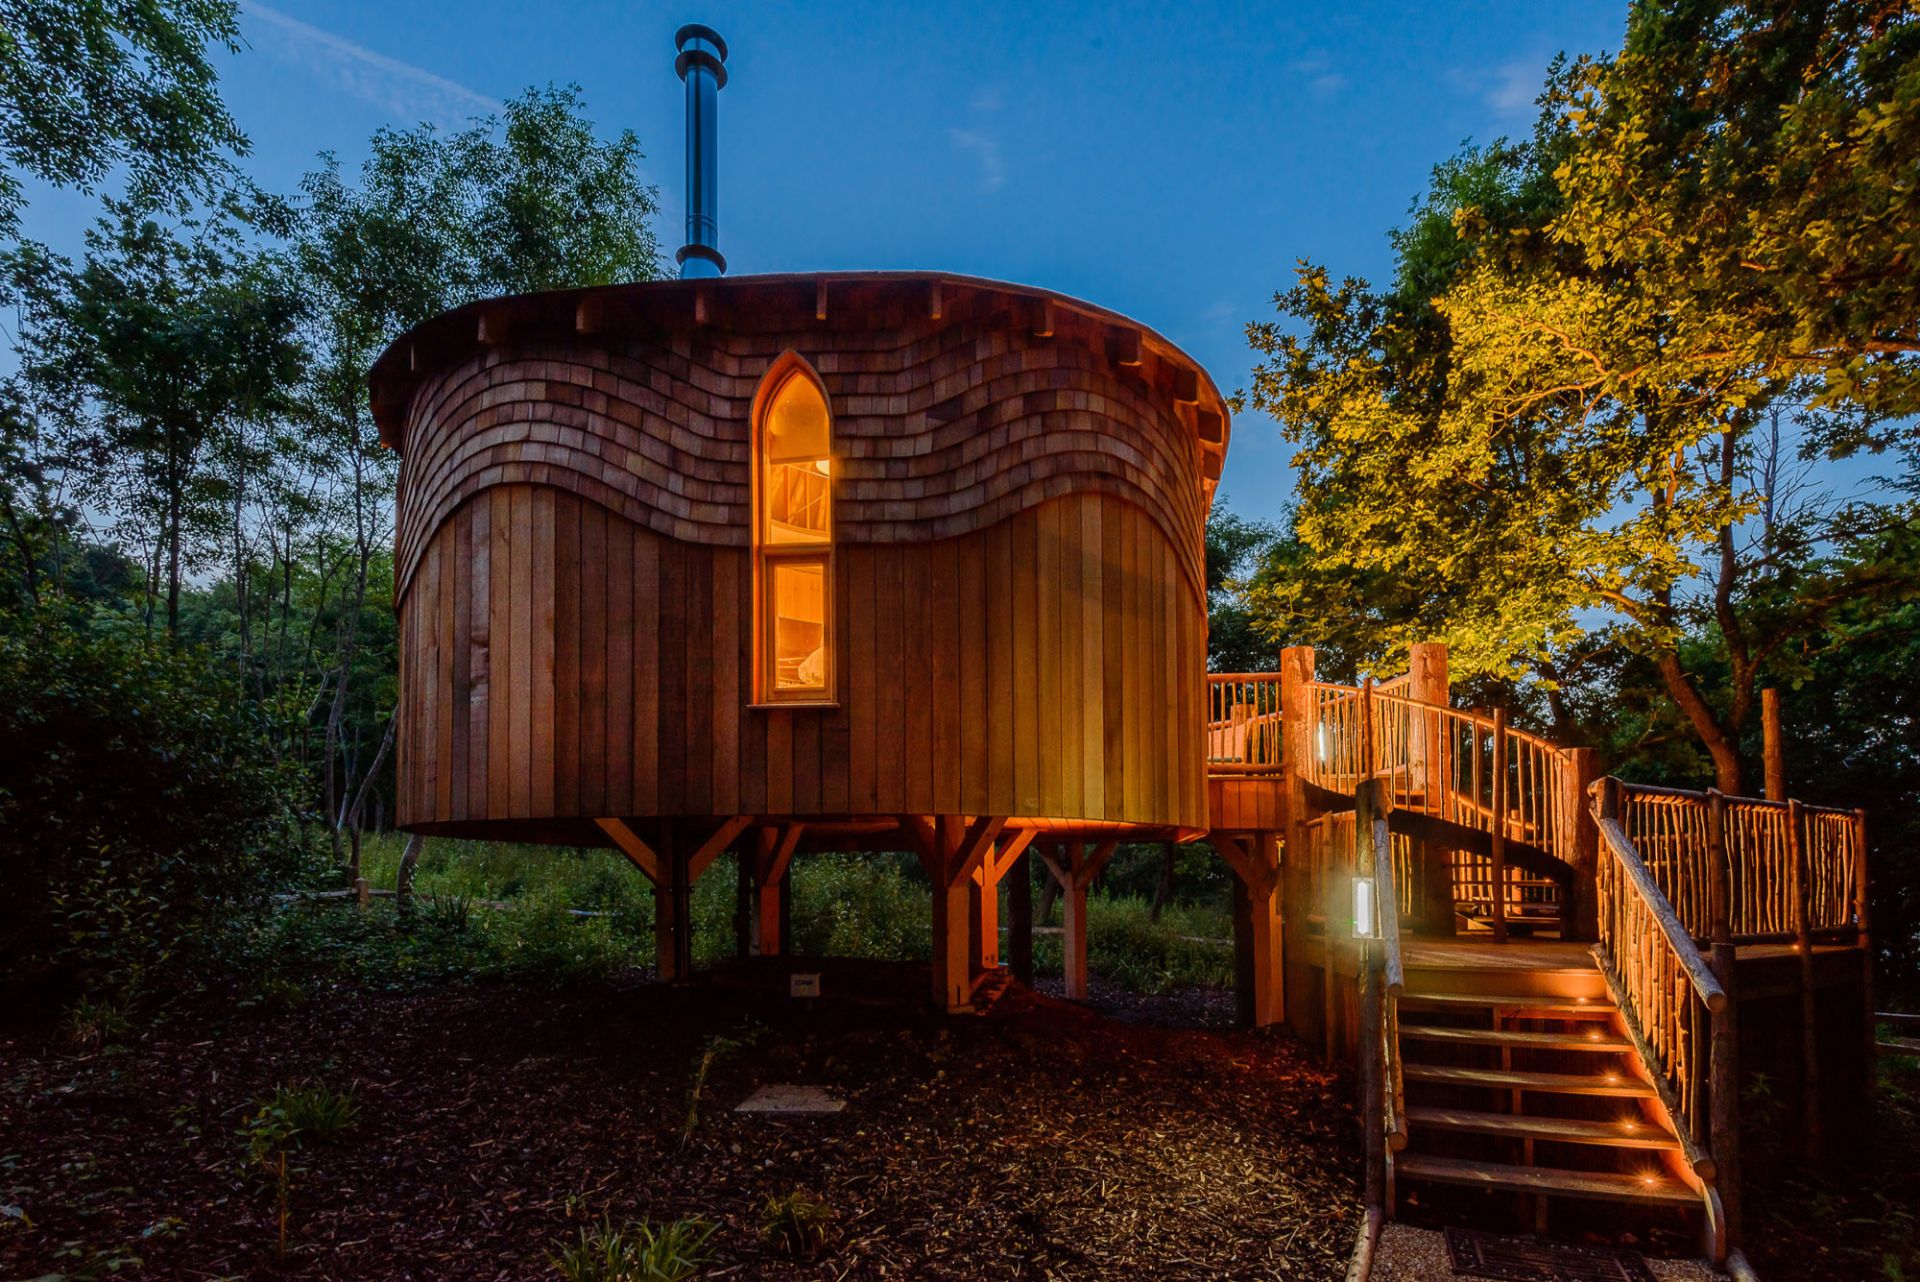 low-round-treehouse-in-woods-lit-up-at-night-woodside-bay-wootton-bridge-isle-of-wight